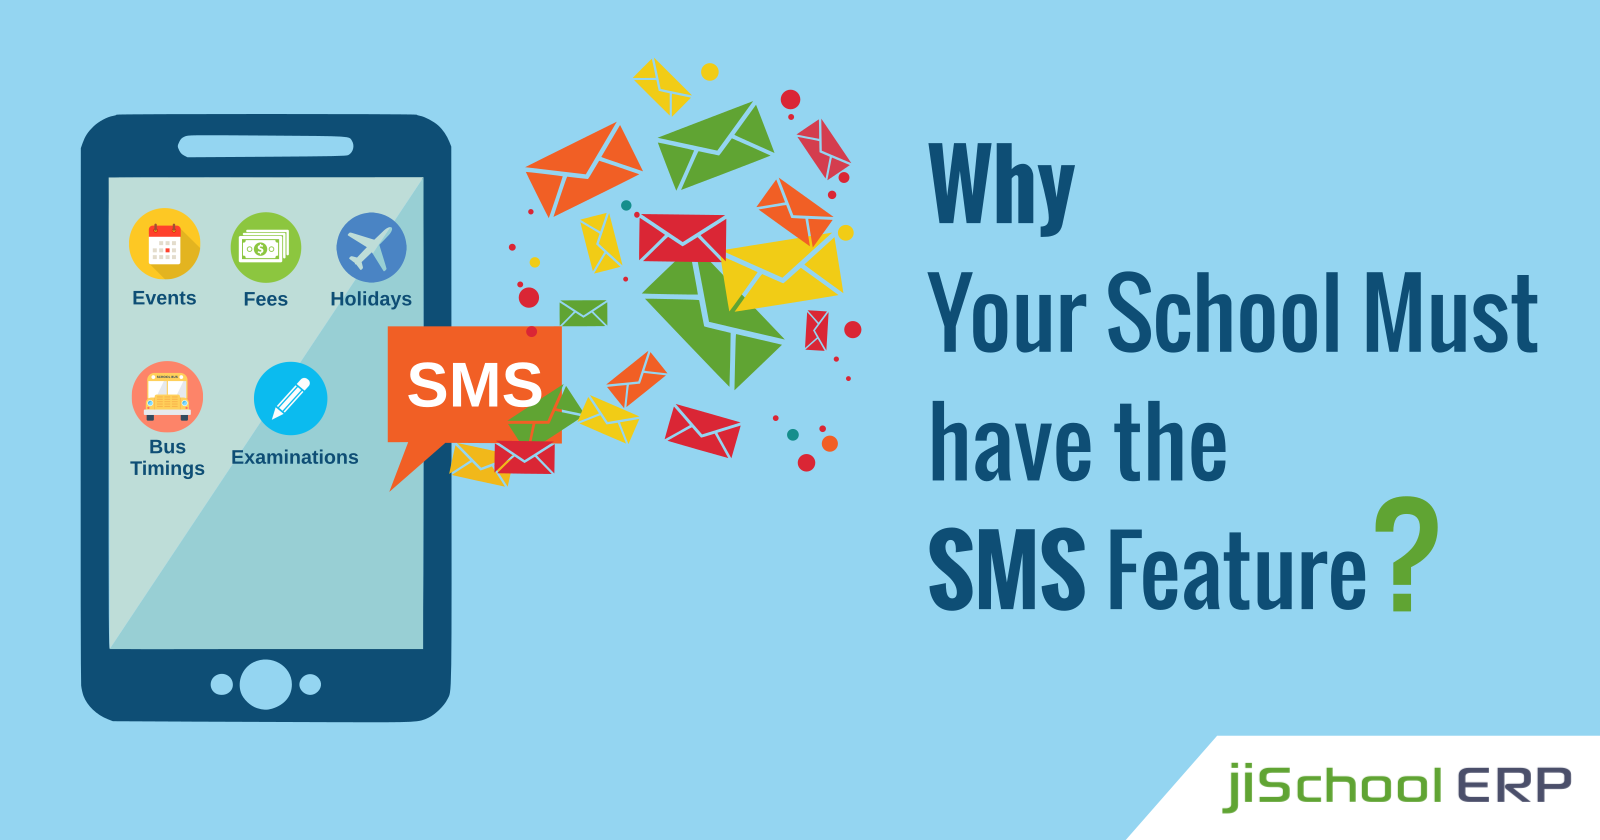 Why Your School Must Have the SMS Feature